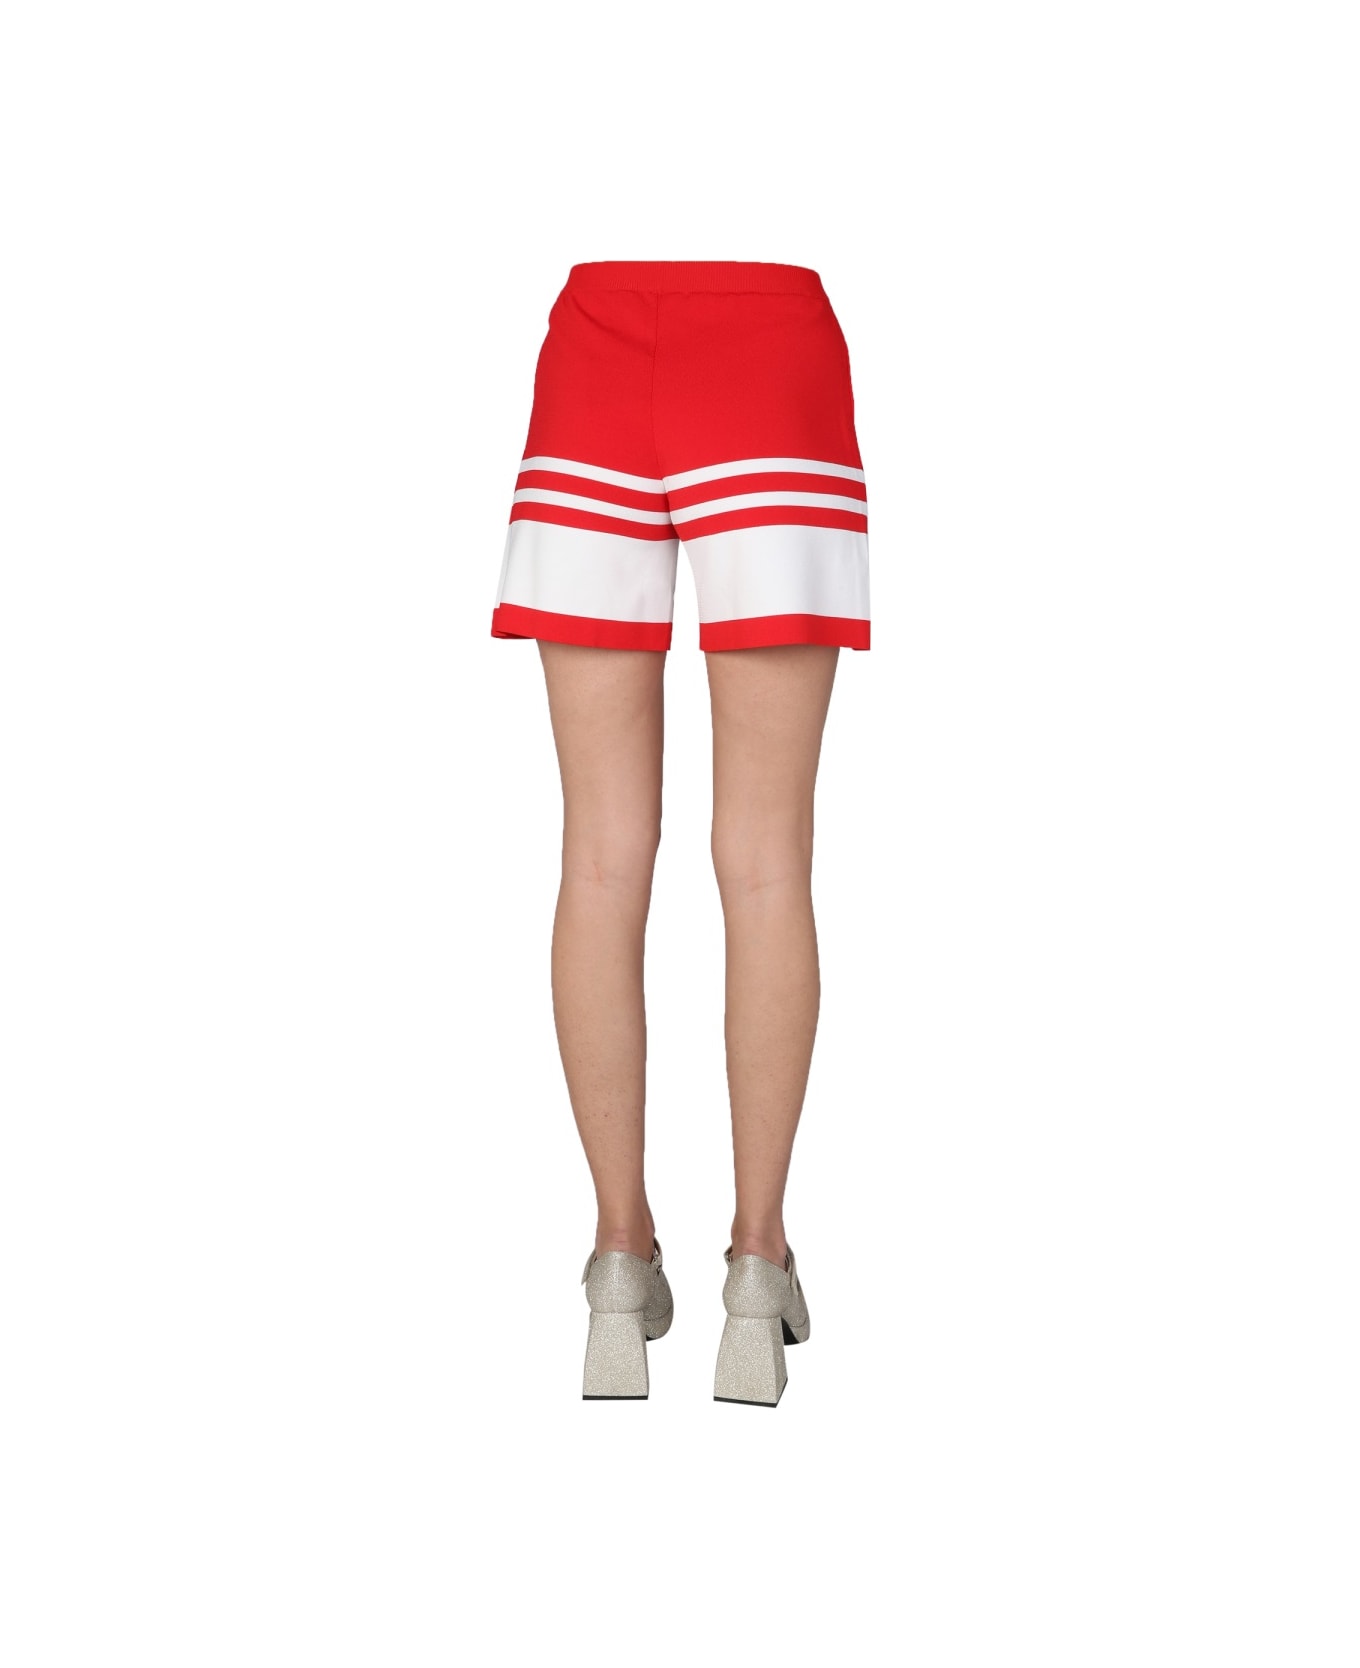 Boutique Moschino "sailor Mood" Shorts - RED ショートパンツ